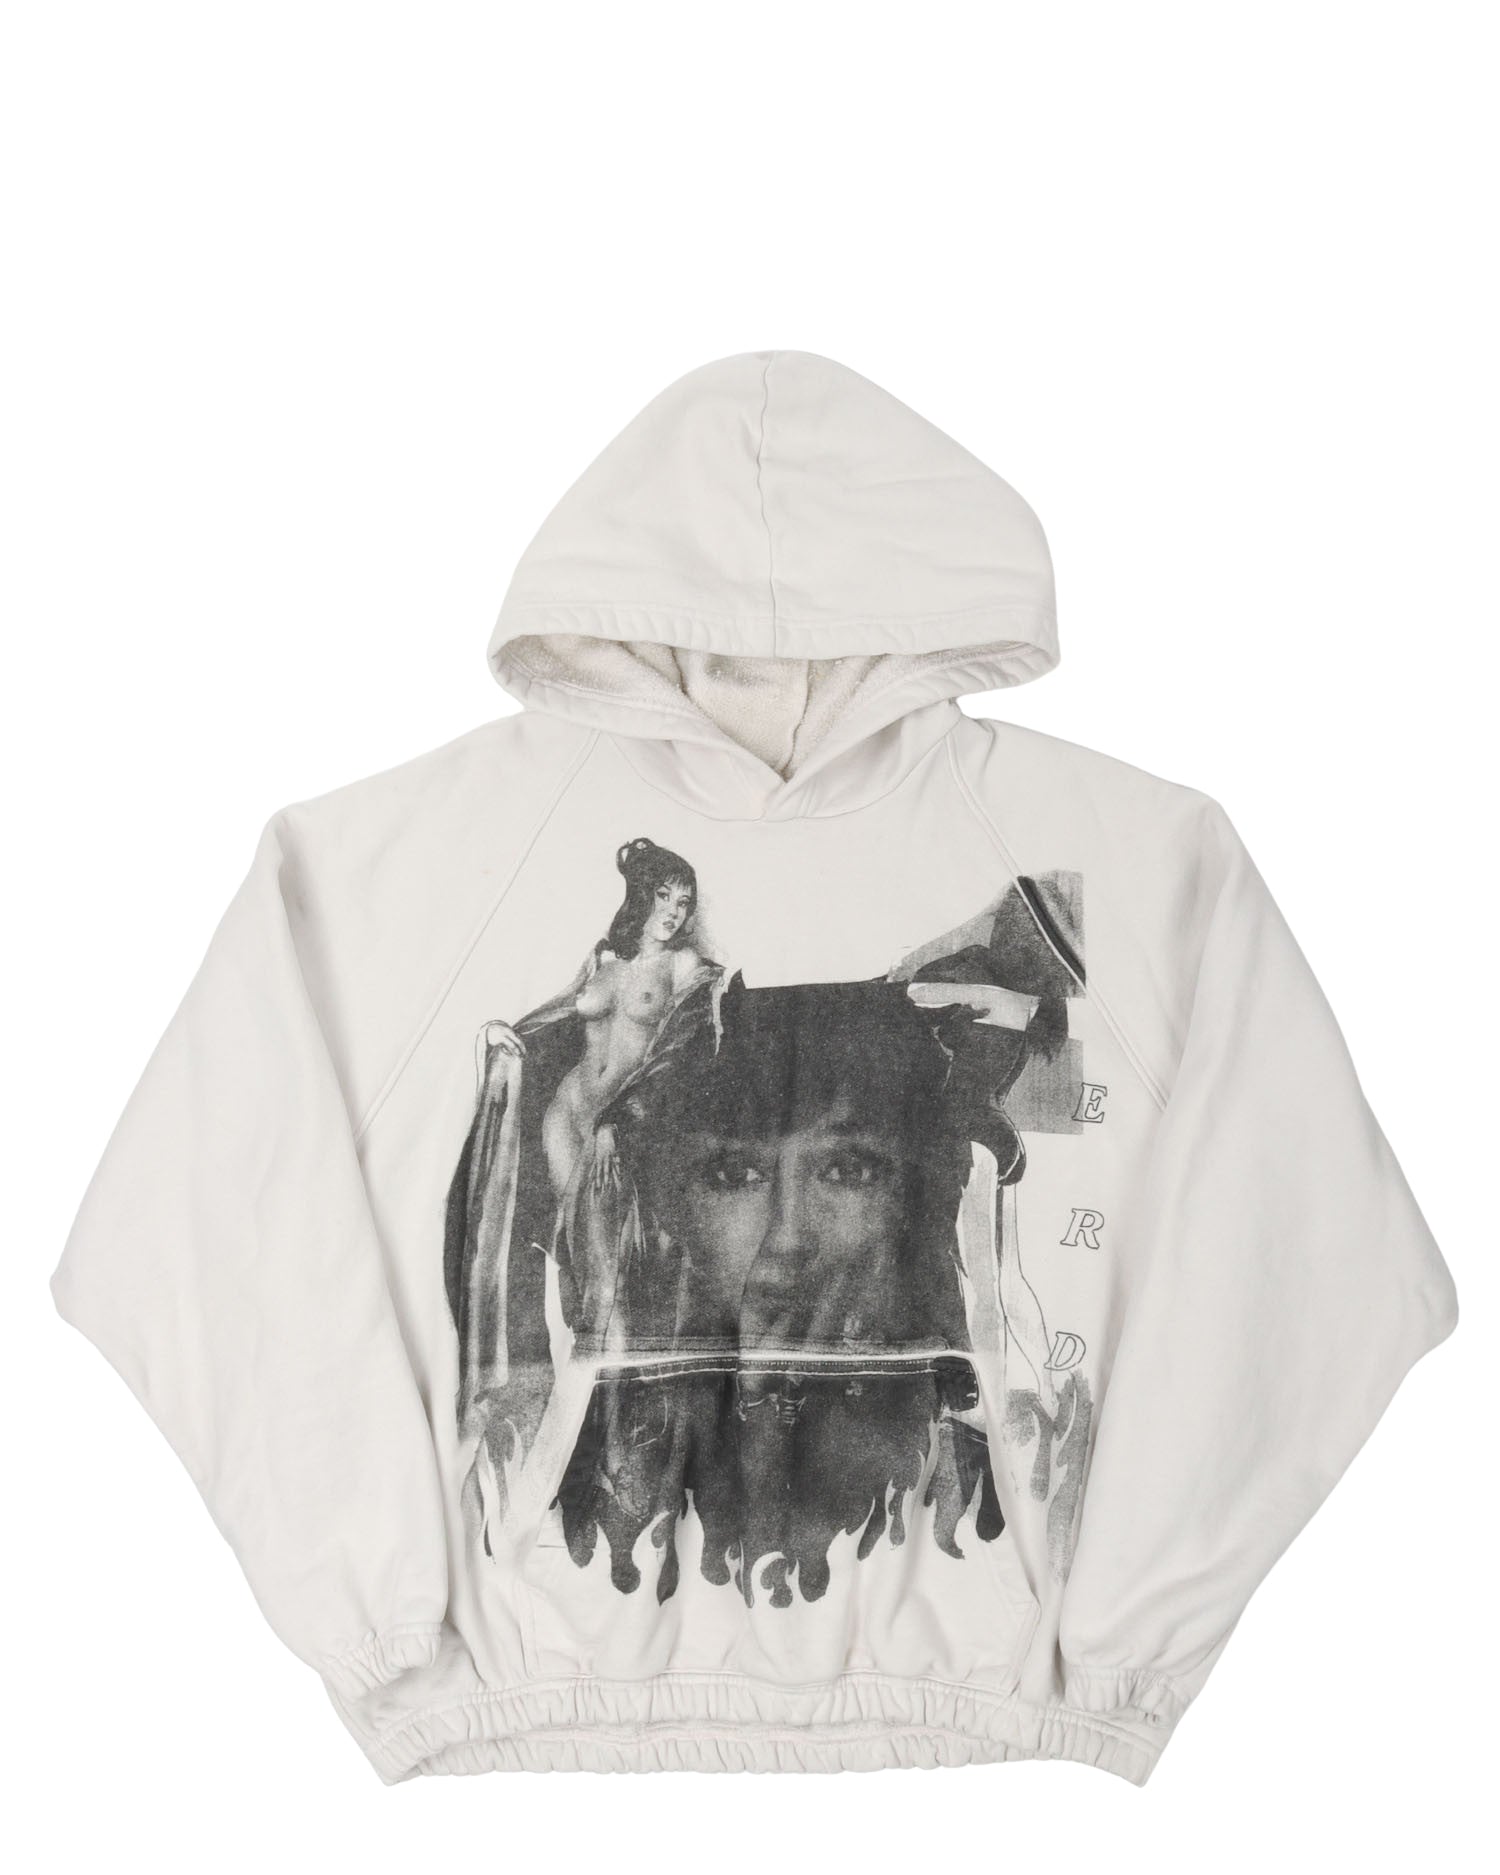 Name Your Poison Hoodie UNRELEASED